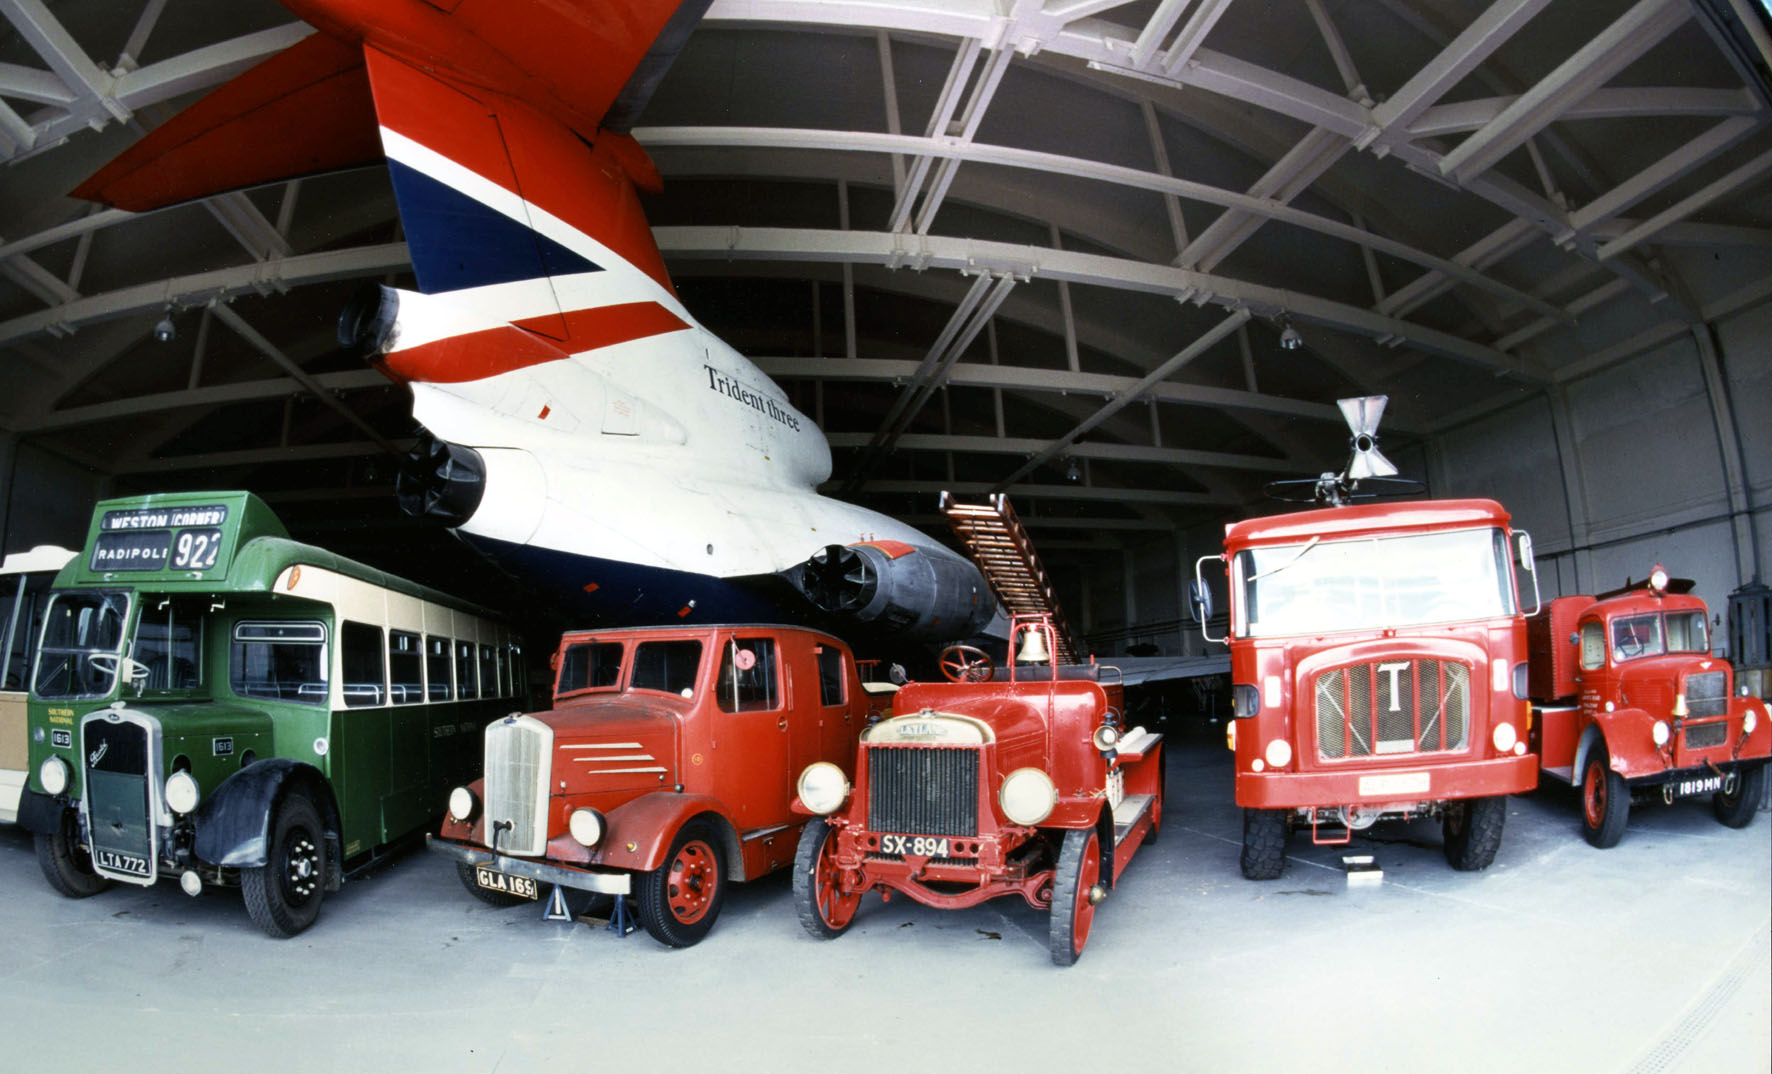 The Wroughton site houses large objects in aircraft hangars. Image credit: Science Museum